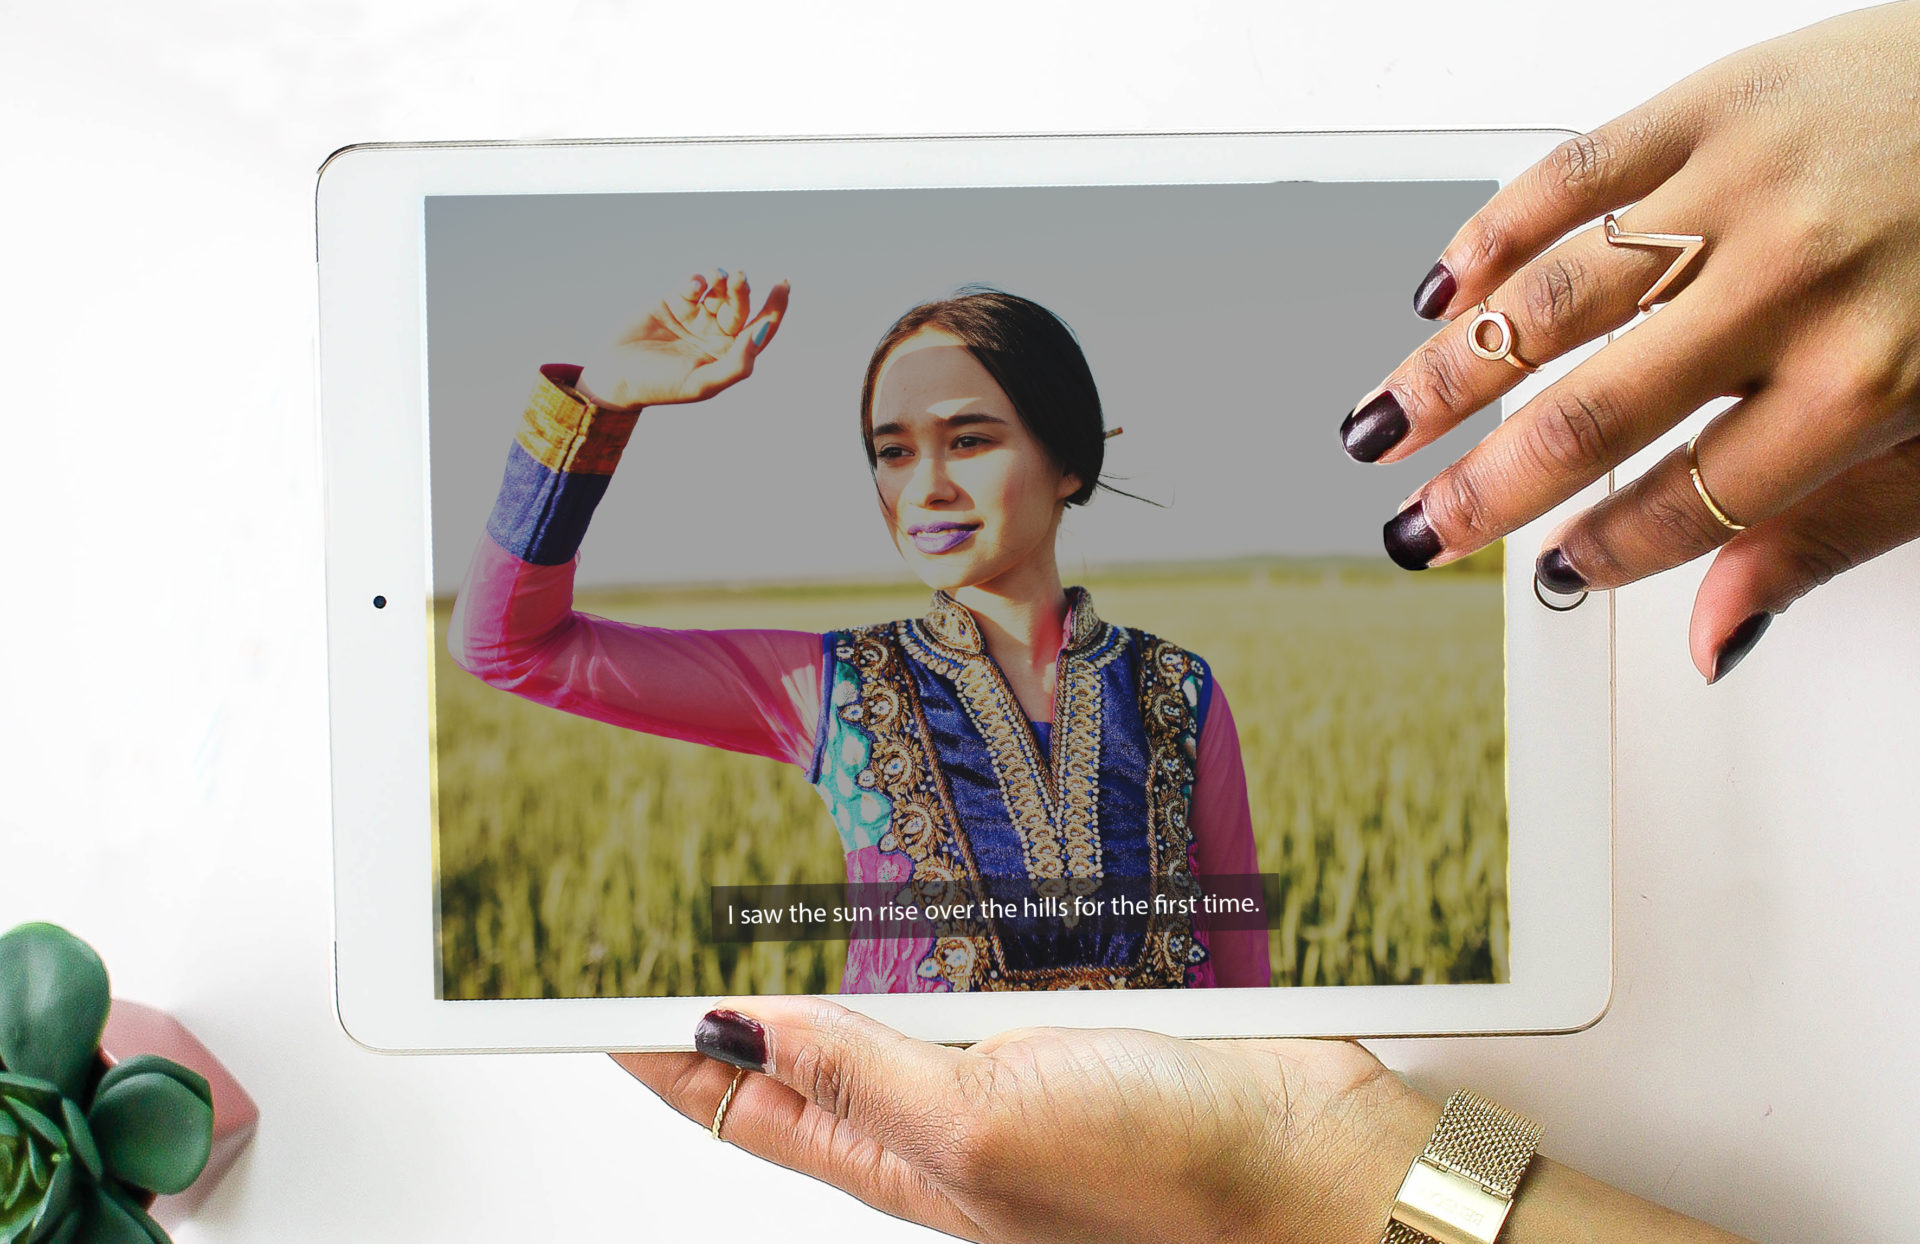 A person using a tablet device. The device screen pictures a young woman walking in a field. She is dressed in a colorful dress and a subtitle at the bottom of the screen reads: "I saw the sun rise over the hills for the first time."